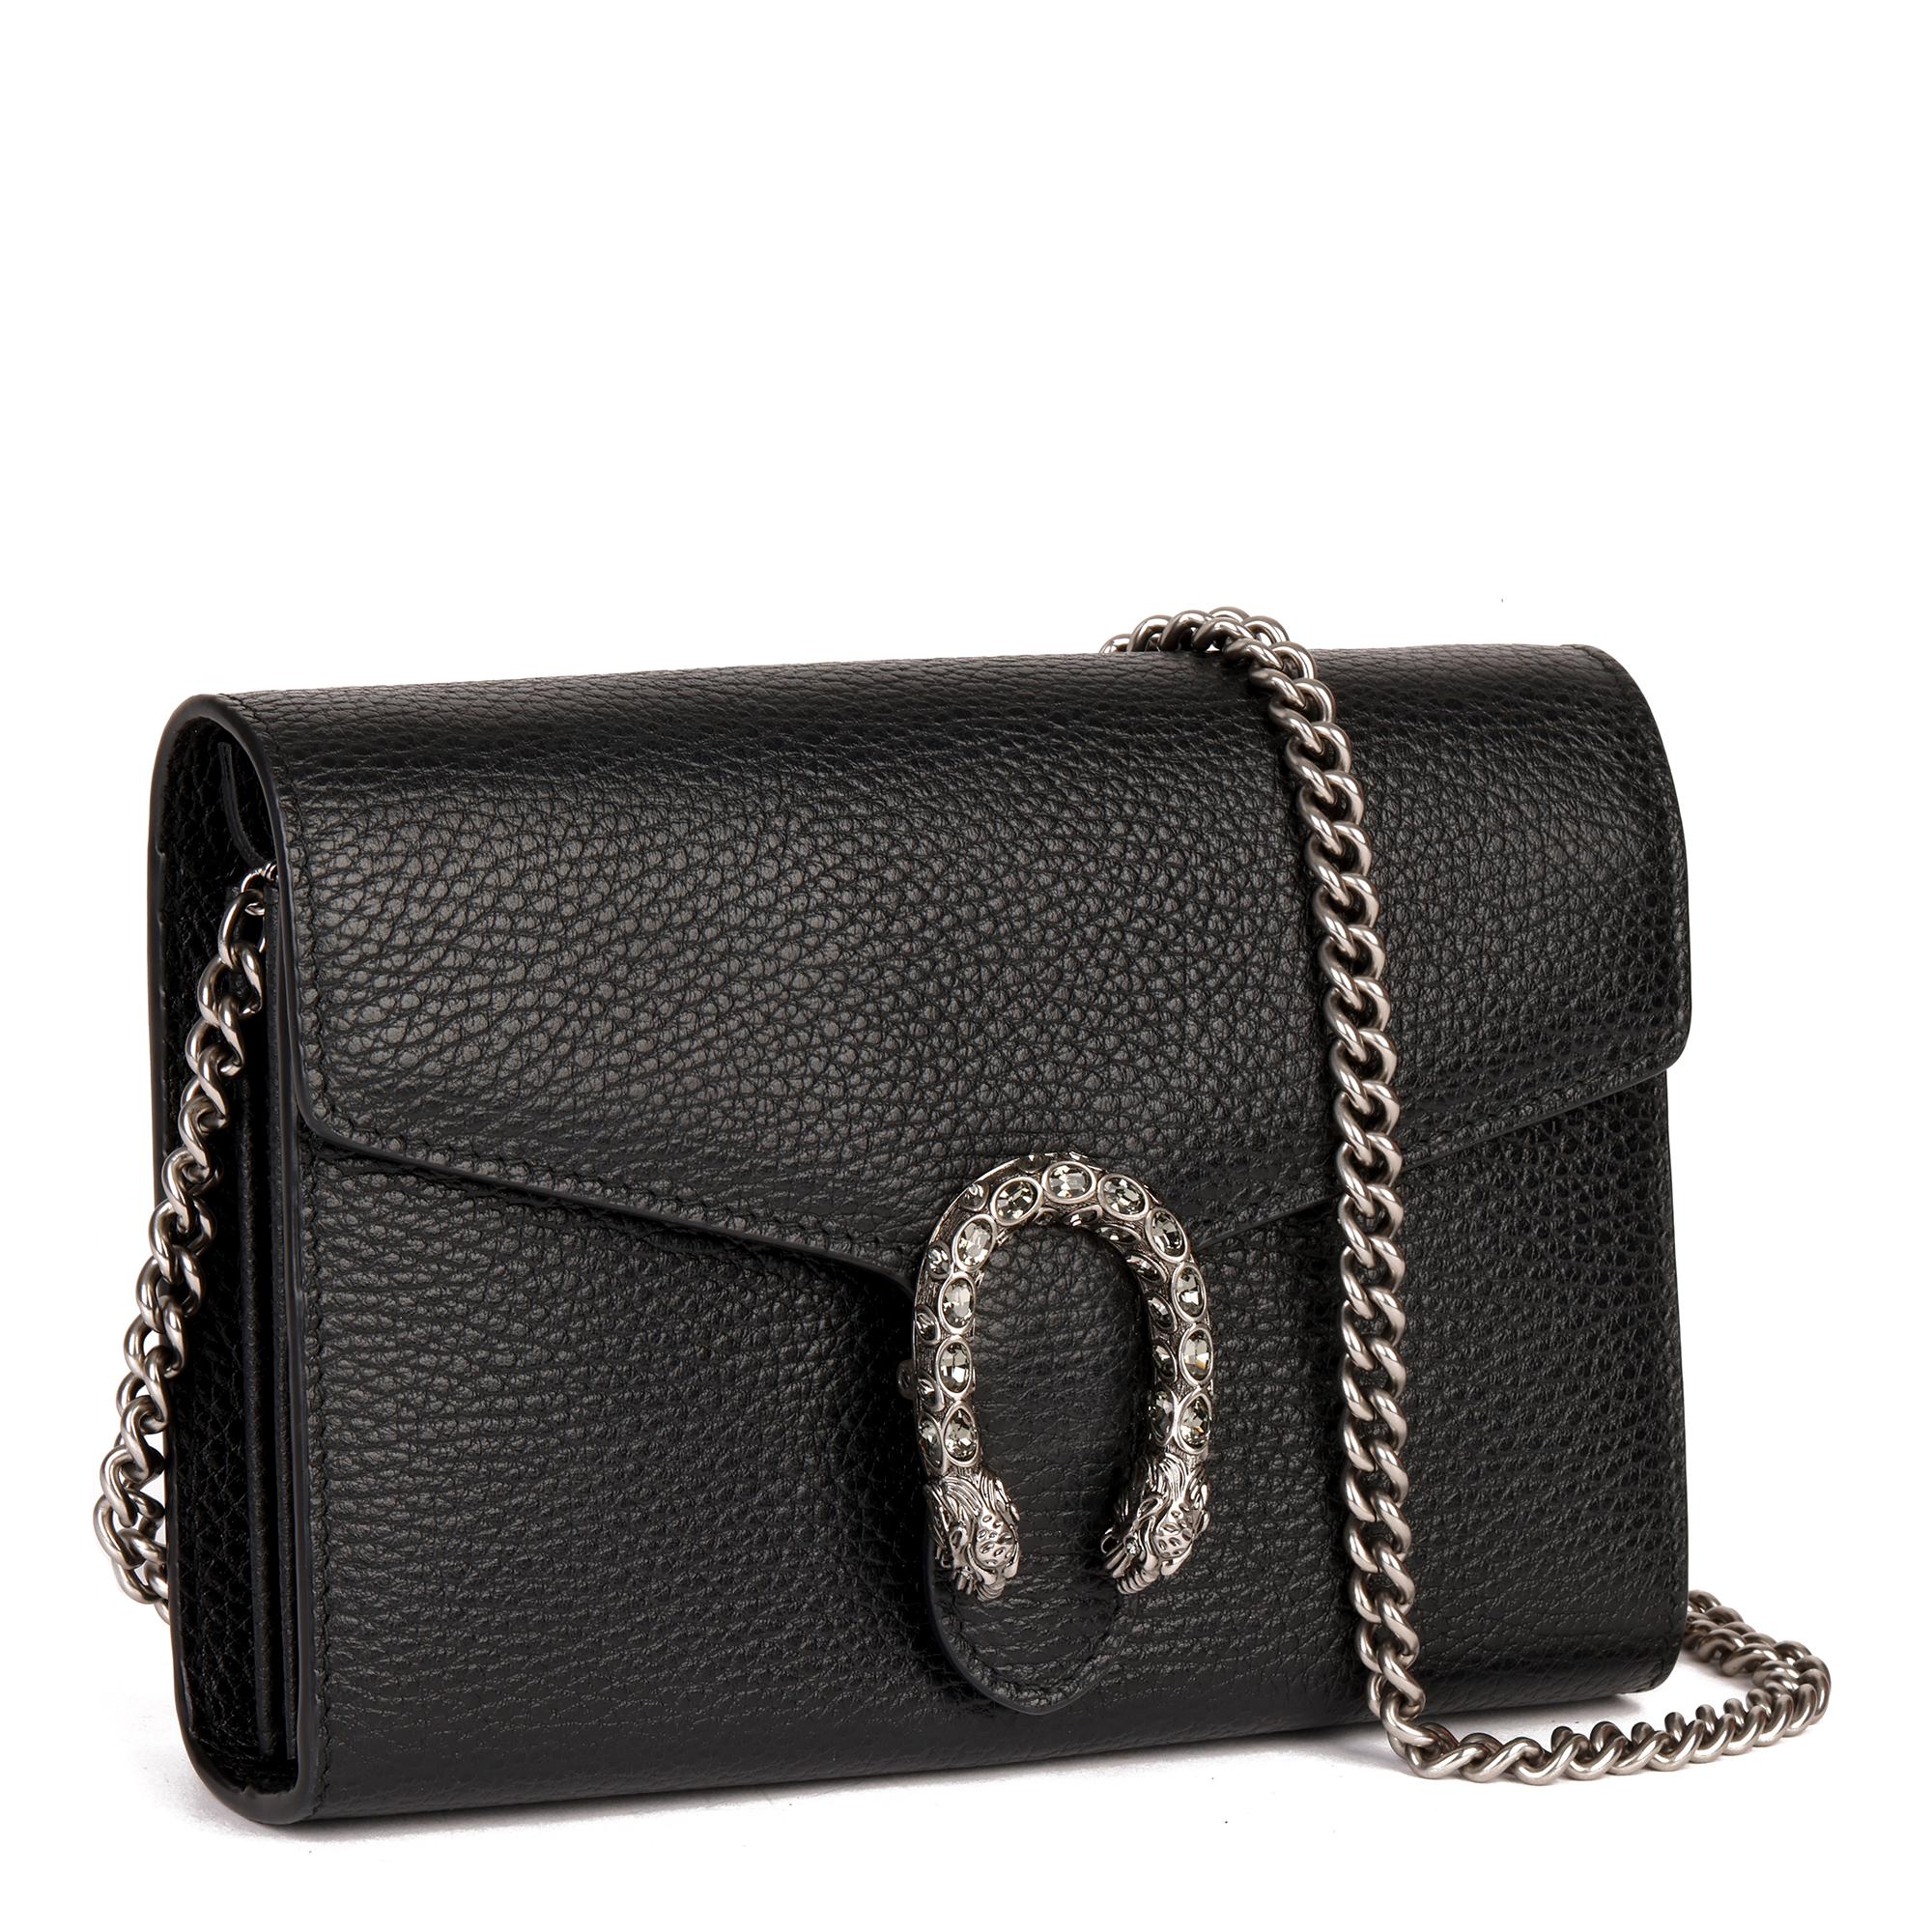 GUCCI
Black Grained Calfskin Mini Dionysus 

Xupes Reference: CB290
Serial Number: 40.231.04.6
Age (Circa): 2018
Accompanied By: Gucci Dust Bag, Receipt
Authenticity Details: Date Stamp (Made in Italy) 
Gender: Ladies
Type: Shoulder,